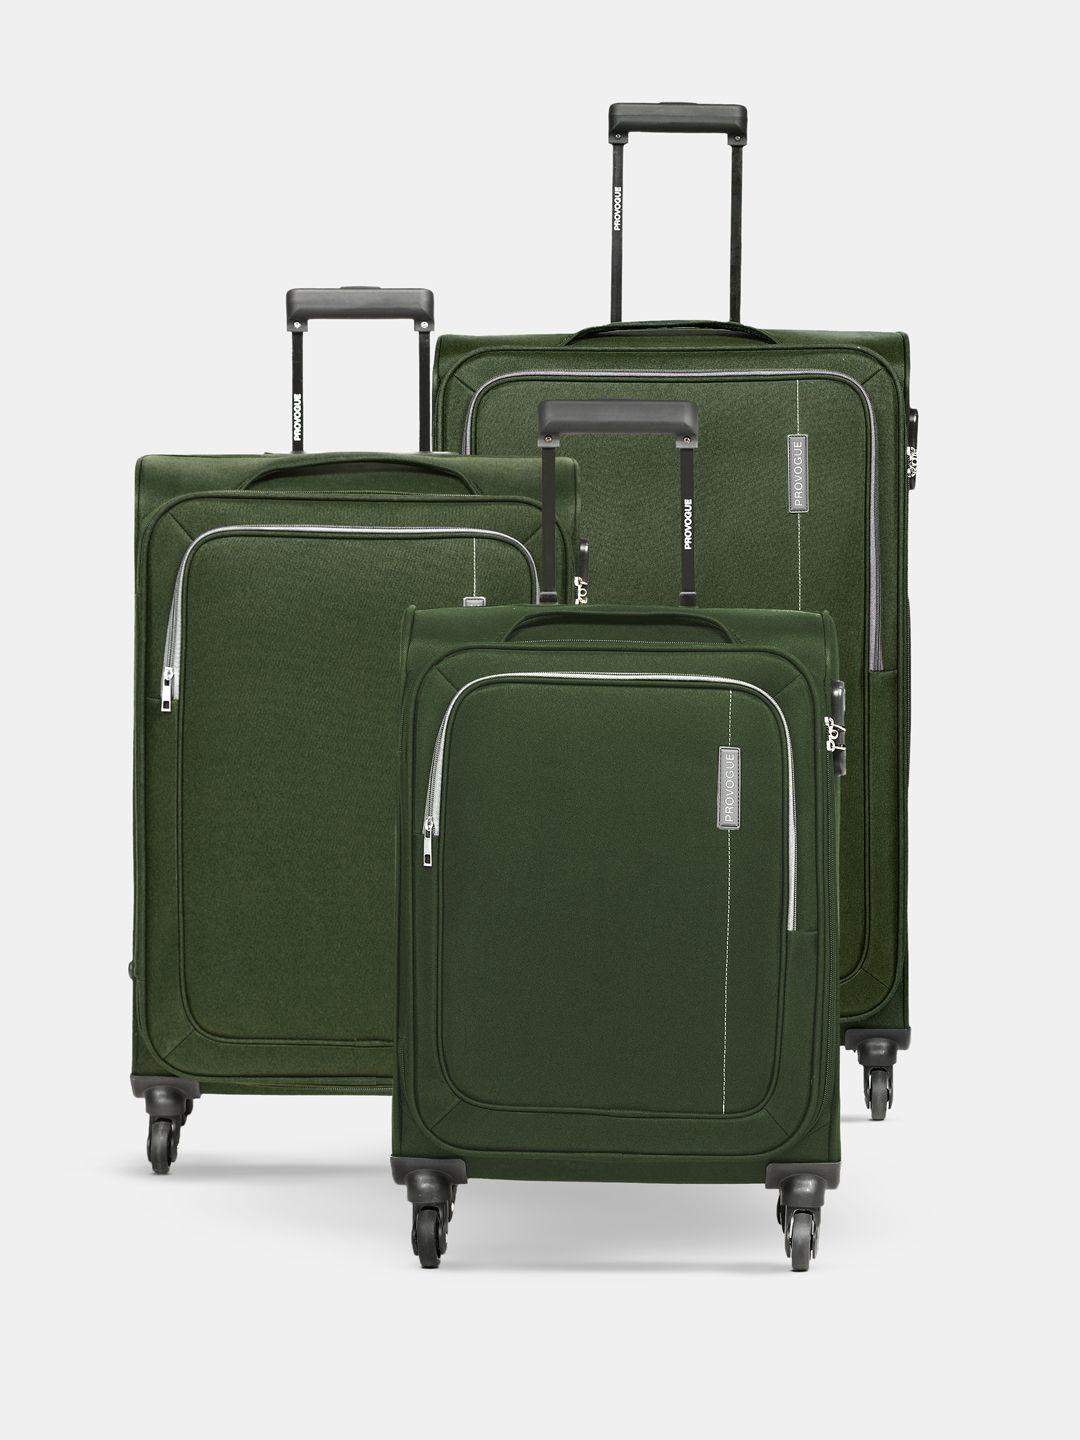 provogue set of 3 trolley suitcases - cabin medium and large